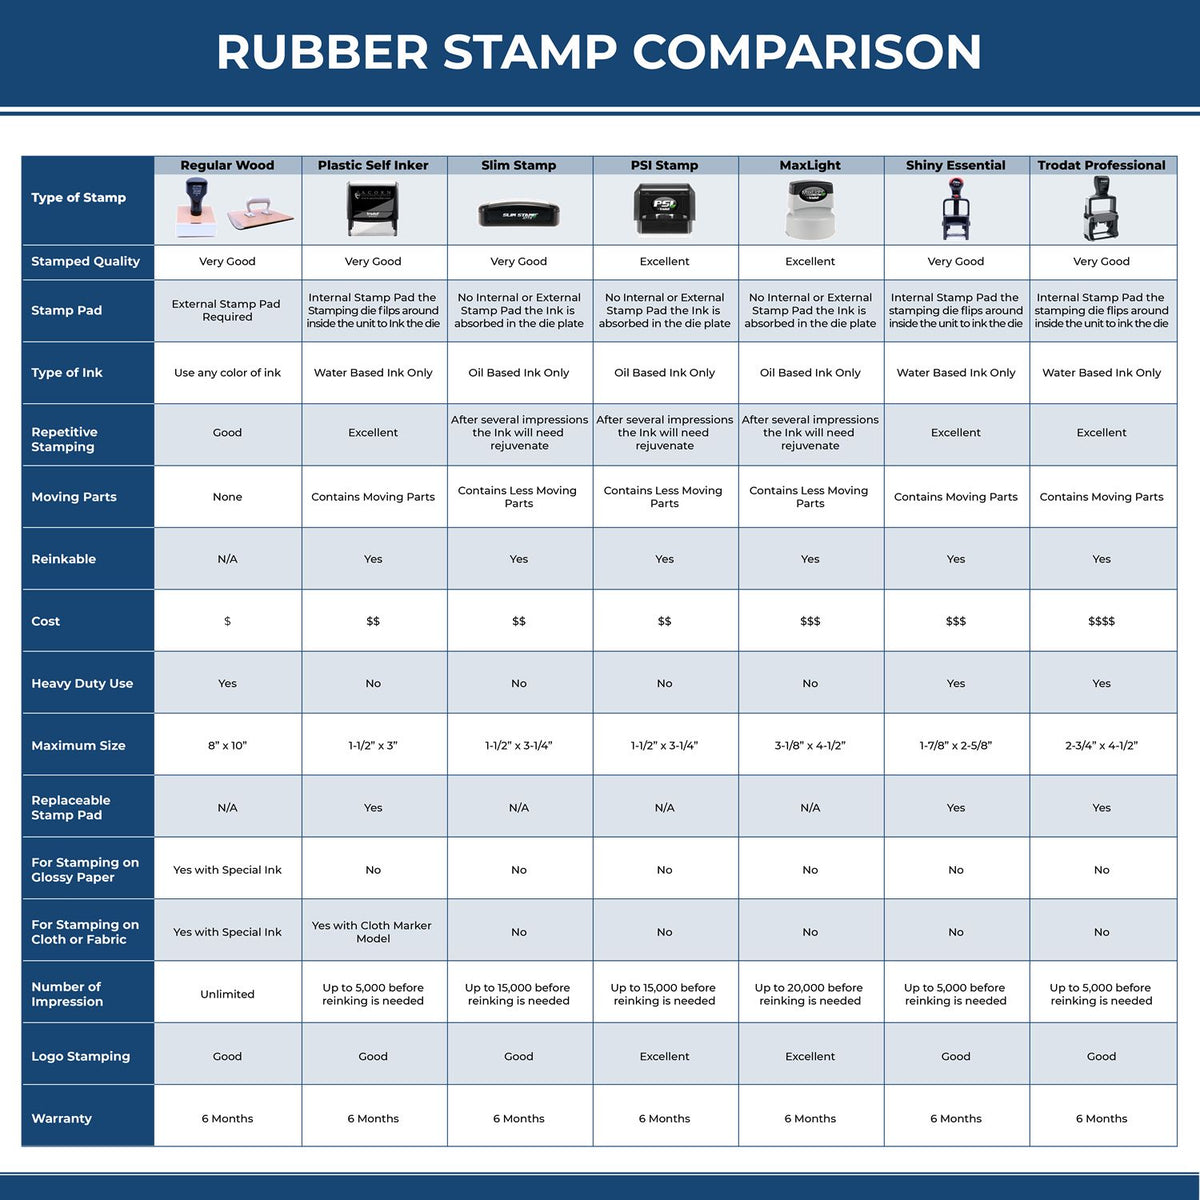 Large Letter Post Air Rubber Stamp 4936R Rubber Stamp Comparison